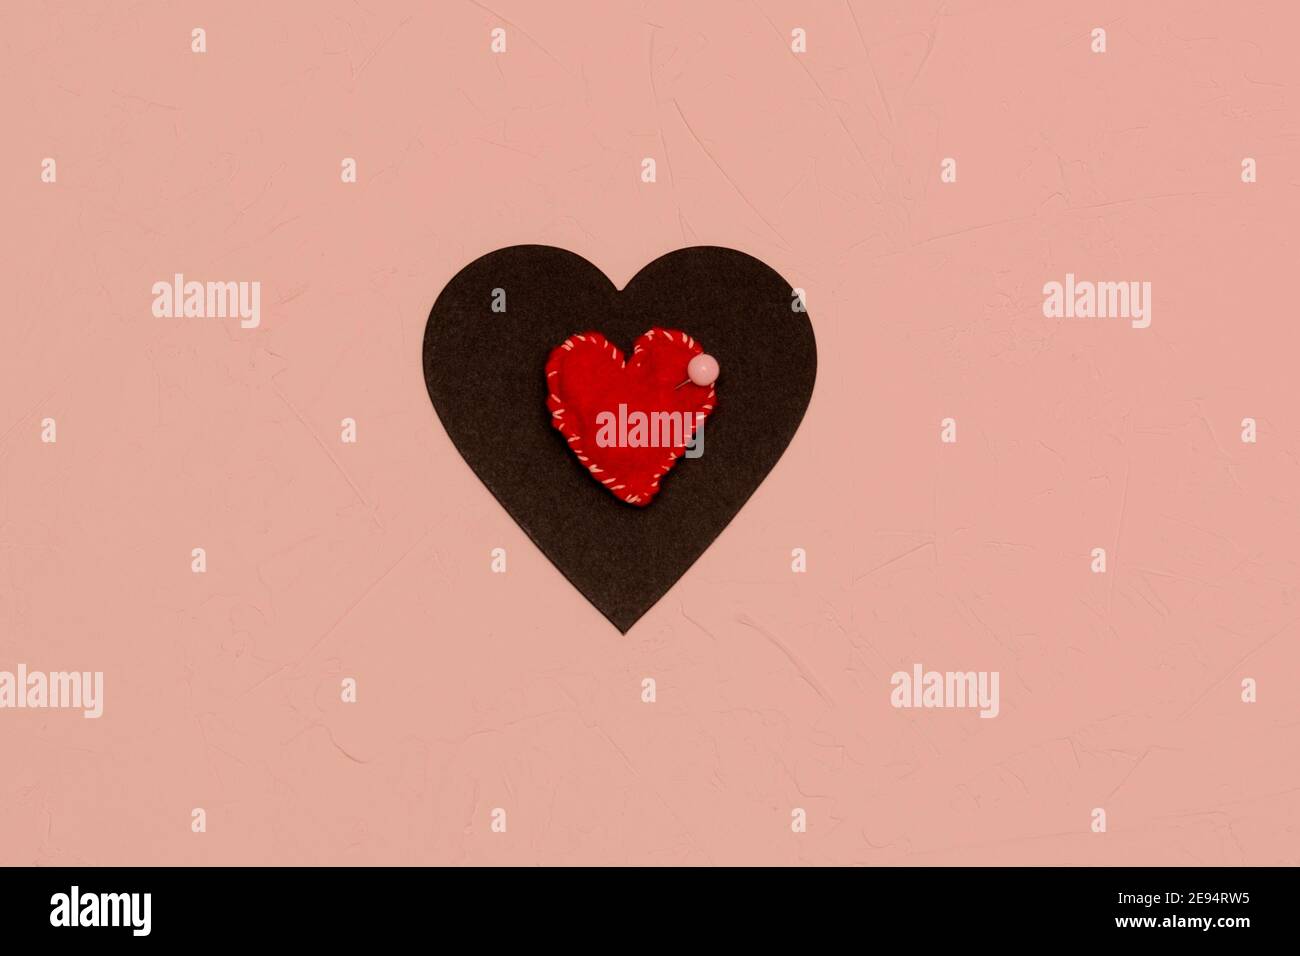 Red heart sewn with threads pinned to black one with needle. Bad love, affection concept. Pink textured background. Stock Photo